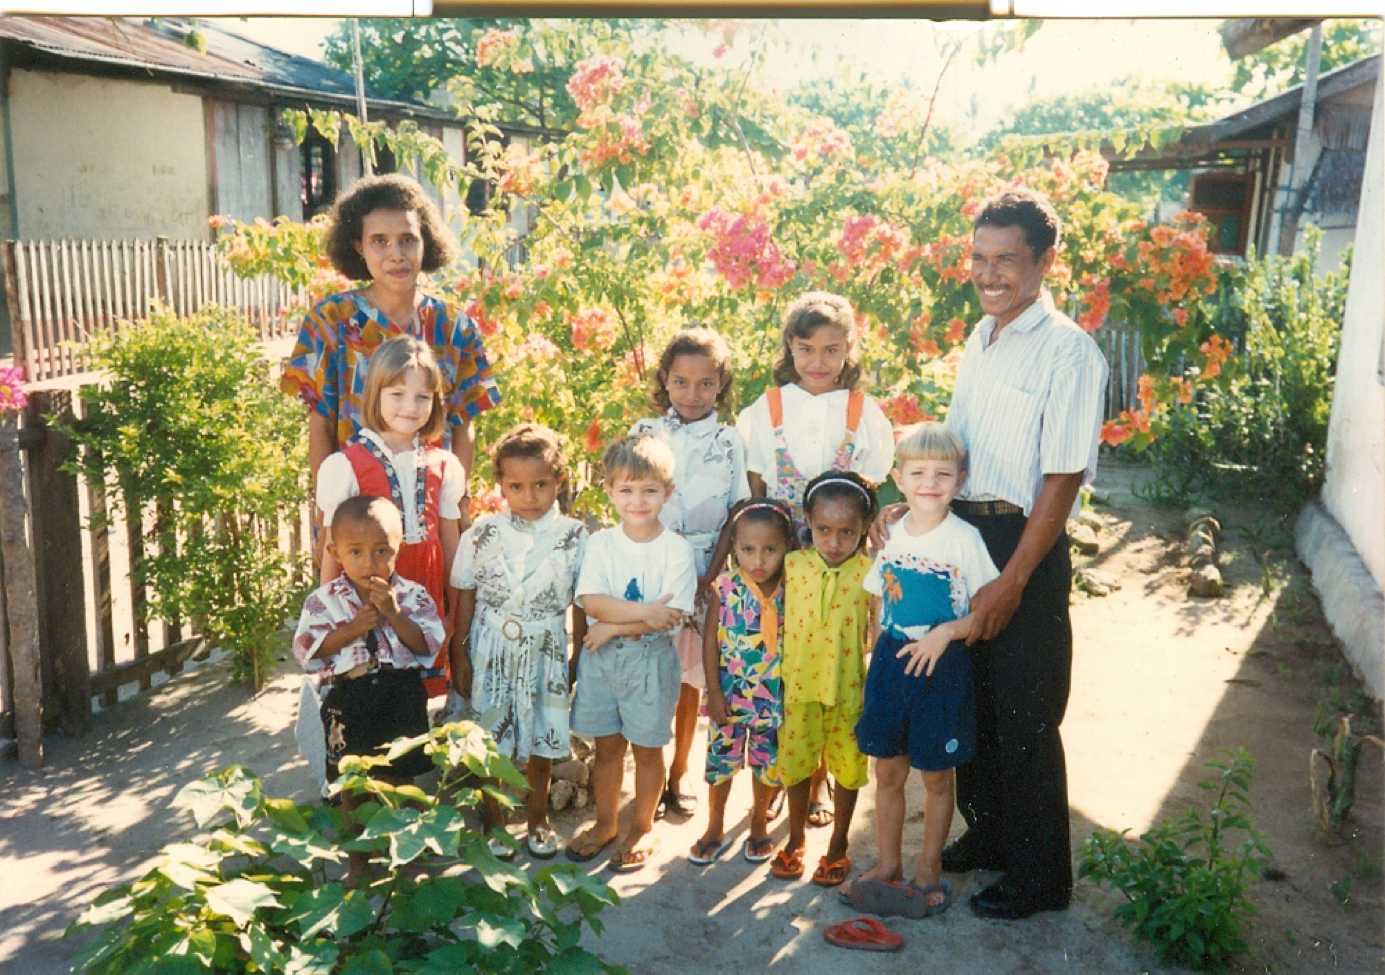 The Marshall's children with the Fordata locals. (Photo: The Marshalls)